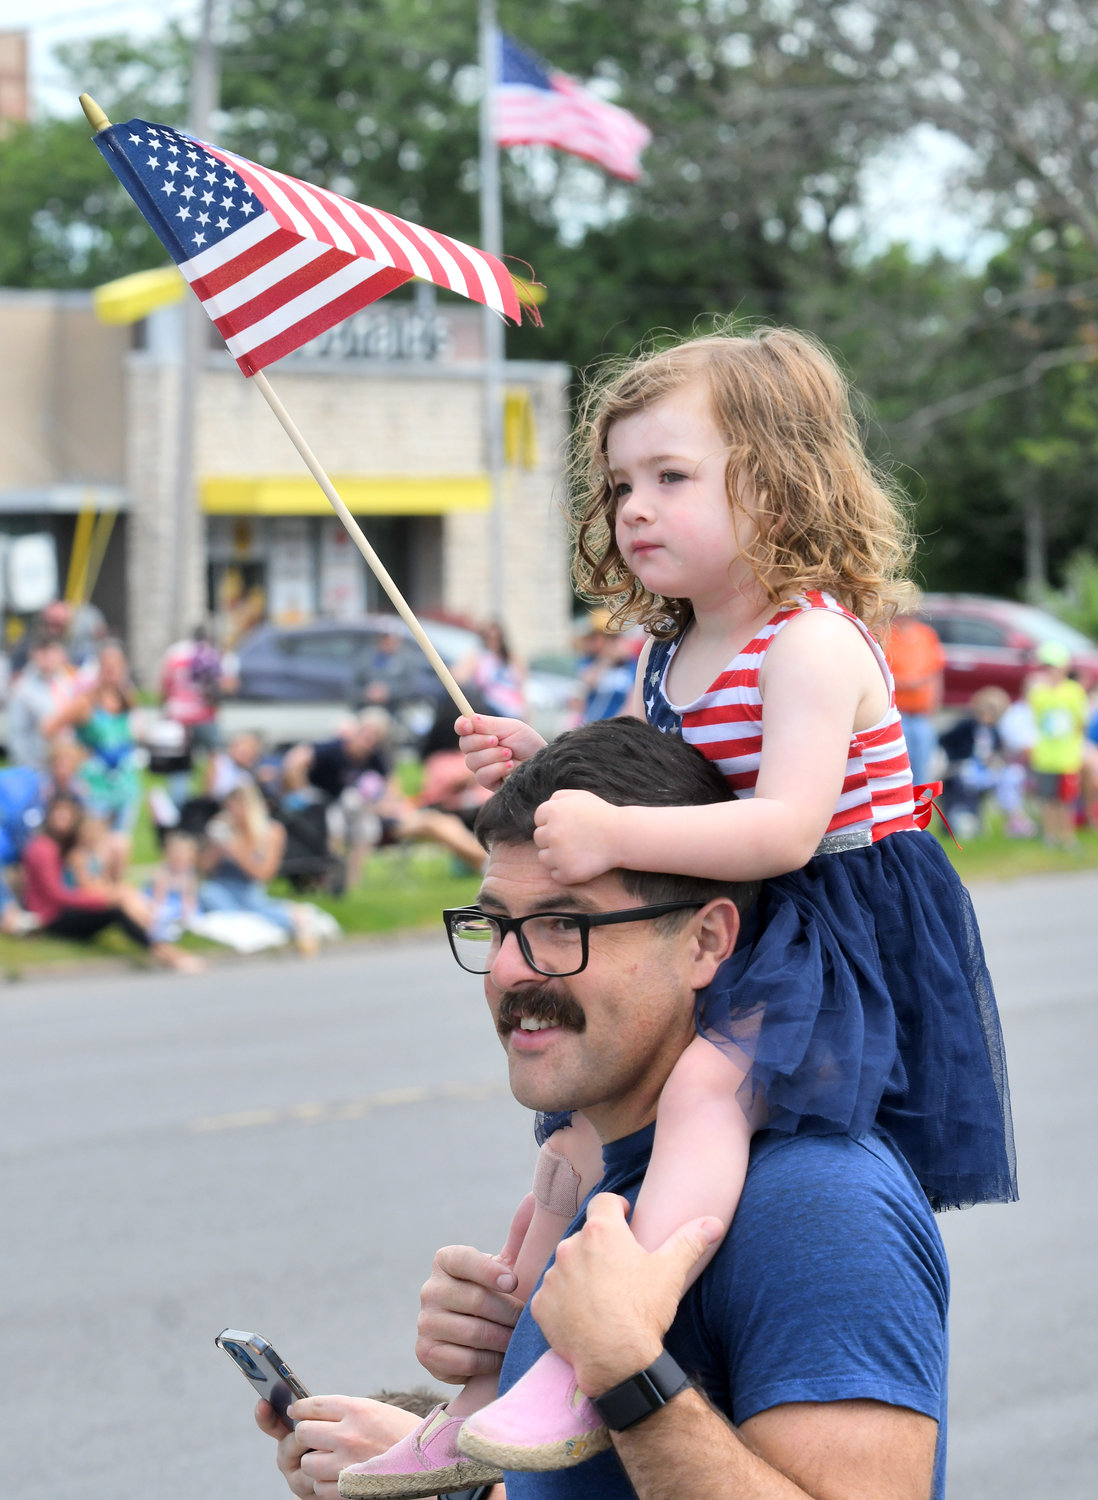 Lilia McMyler, 2, sits on the shoulders of her dad, William McMyler, as the  Fourth of July parade — featuring dozens of local groups and organizations — approaches them on Genesee Street in Utica.